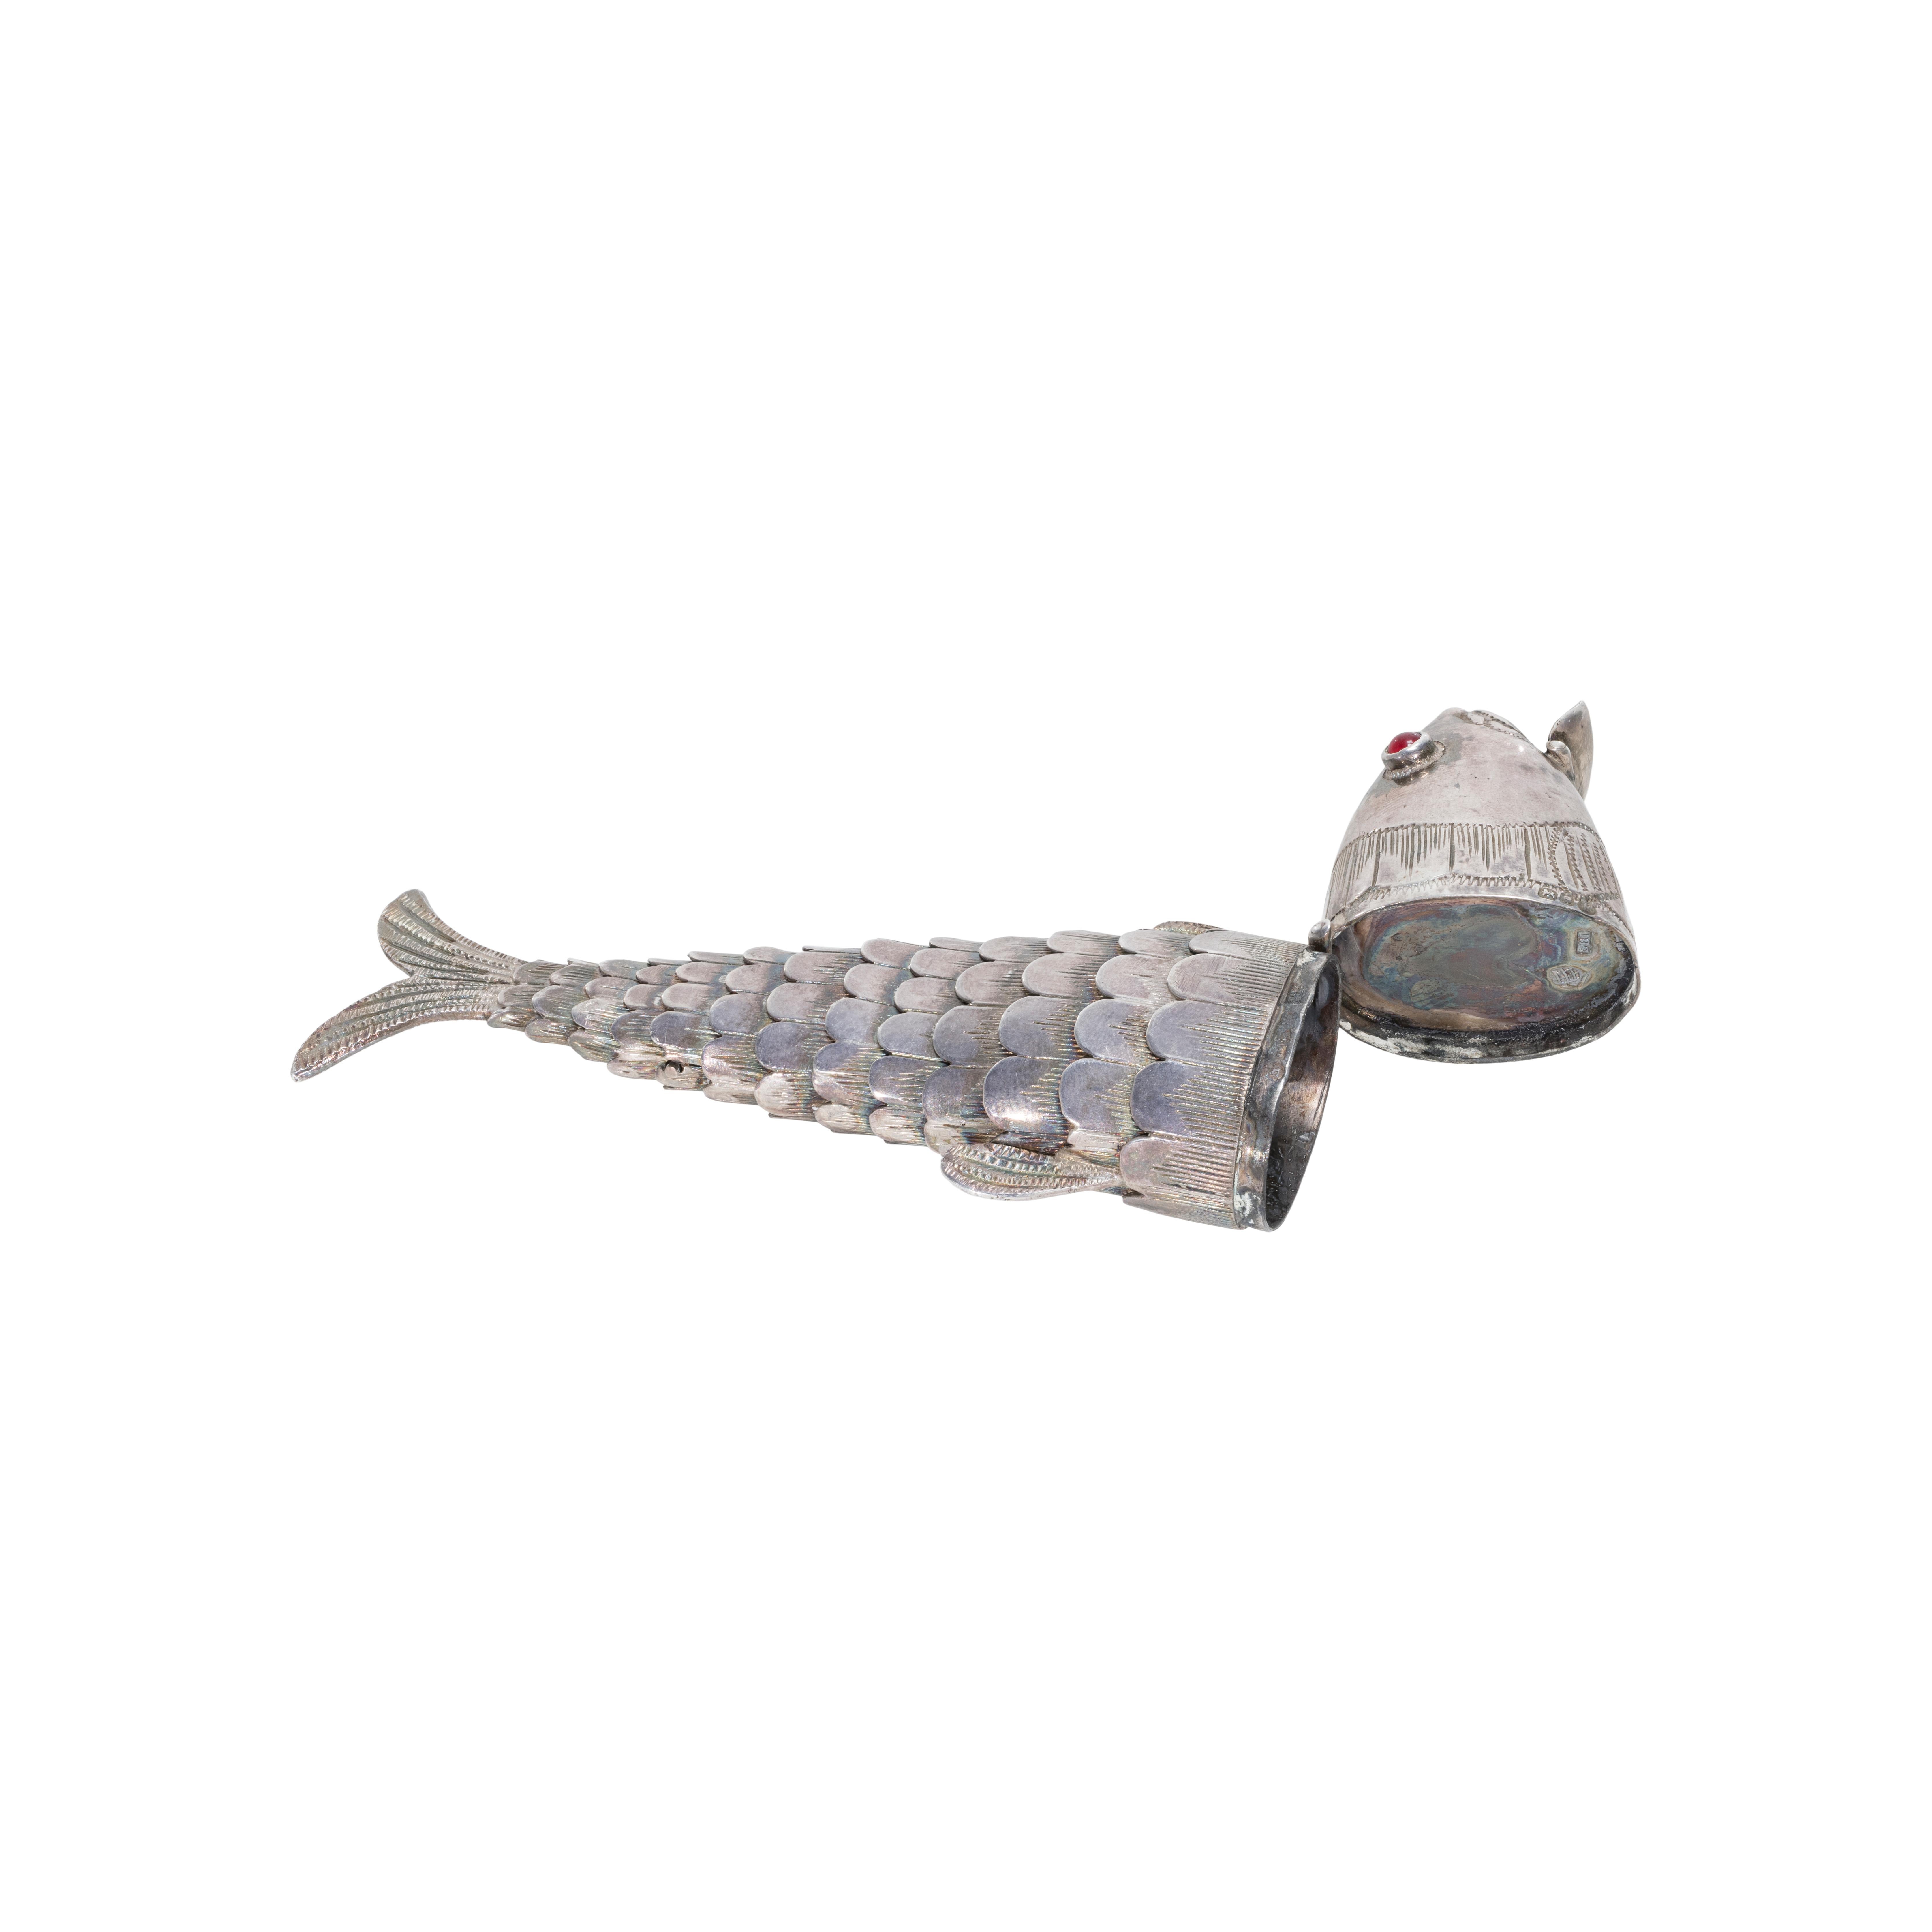 German 800 standard silver articulated fish pill box with hinged head. Ex. Bonhams. Very slinky movable design, intricate detail and jeweled yes. Very unique and ornate.  2.5